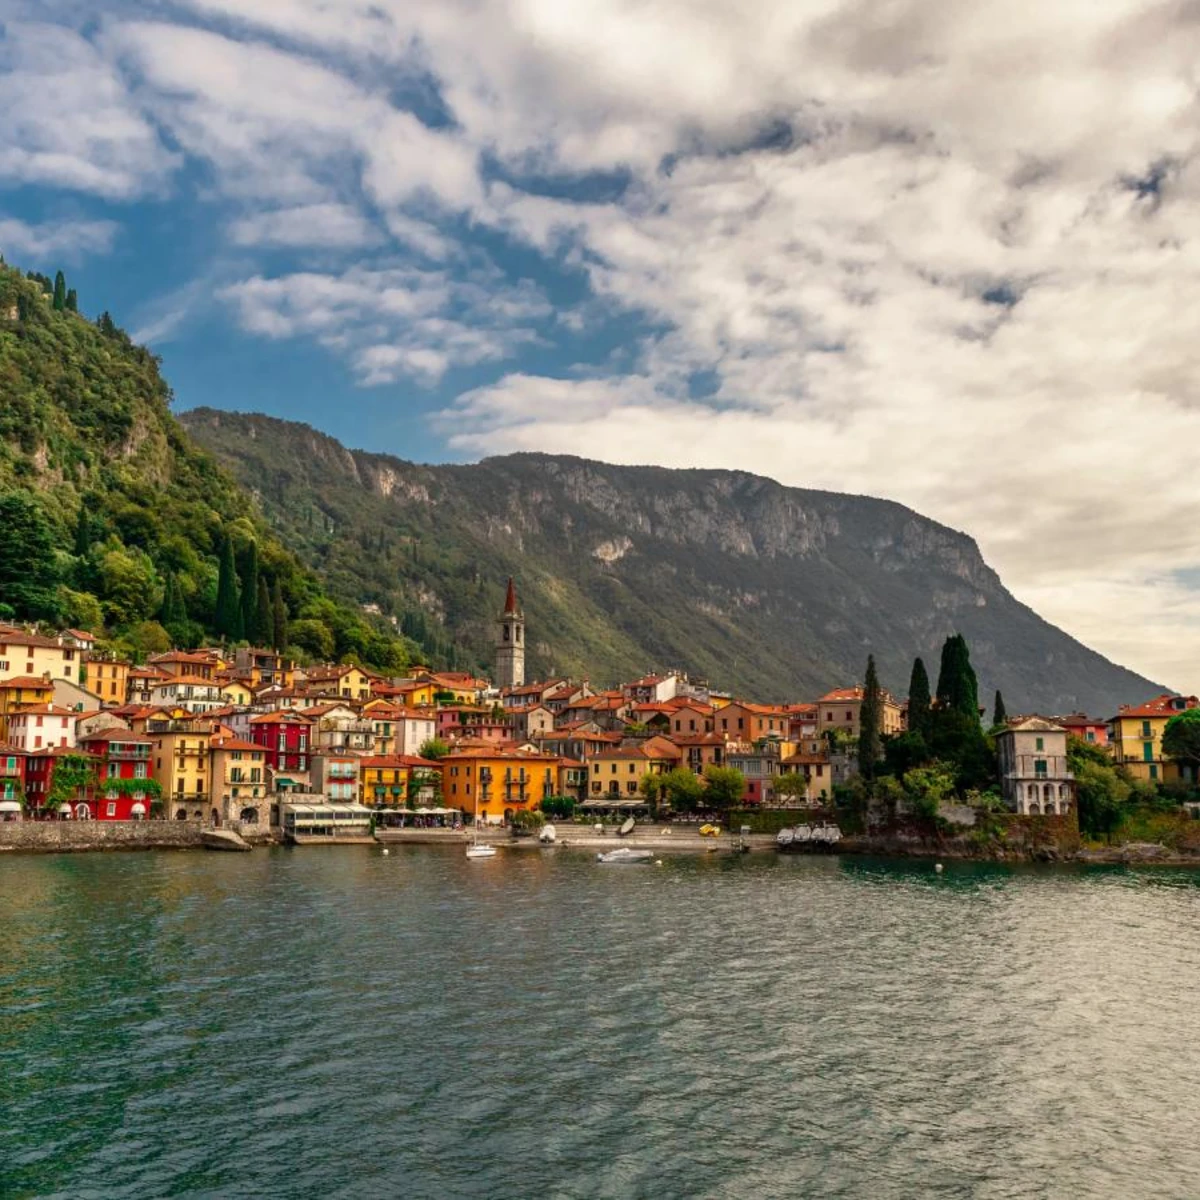 Sea side Italian town, Lake Como in front of mountains on a cloudy but sunny day.